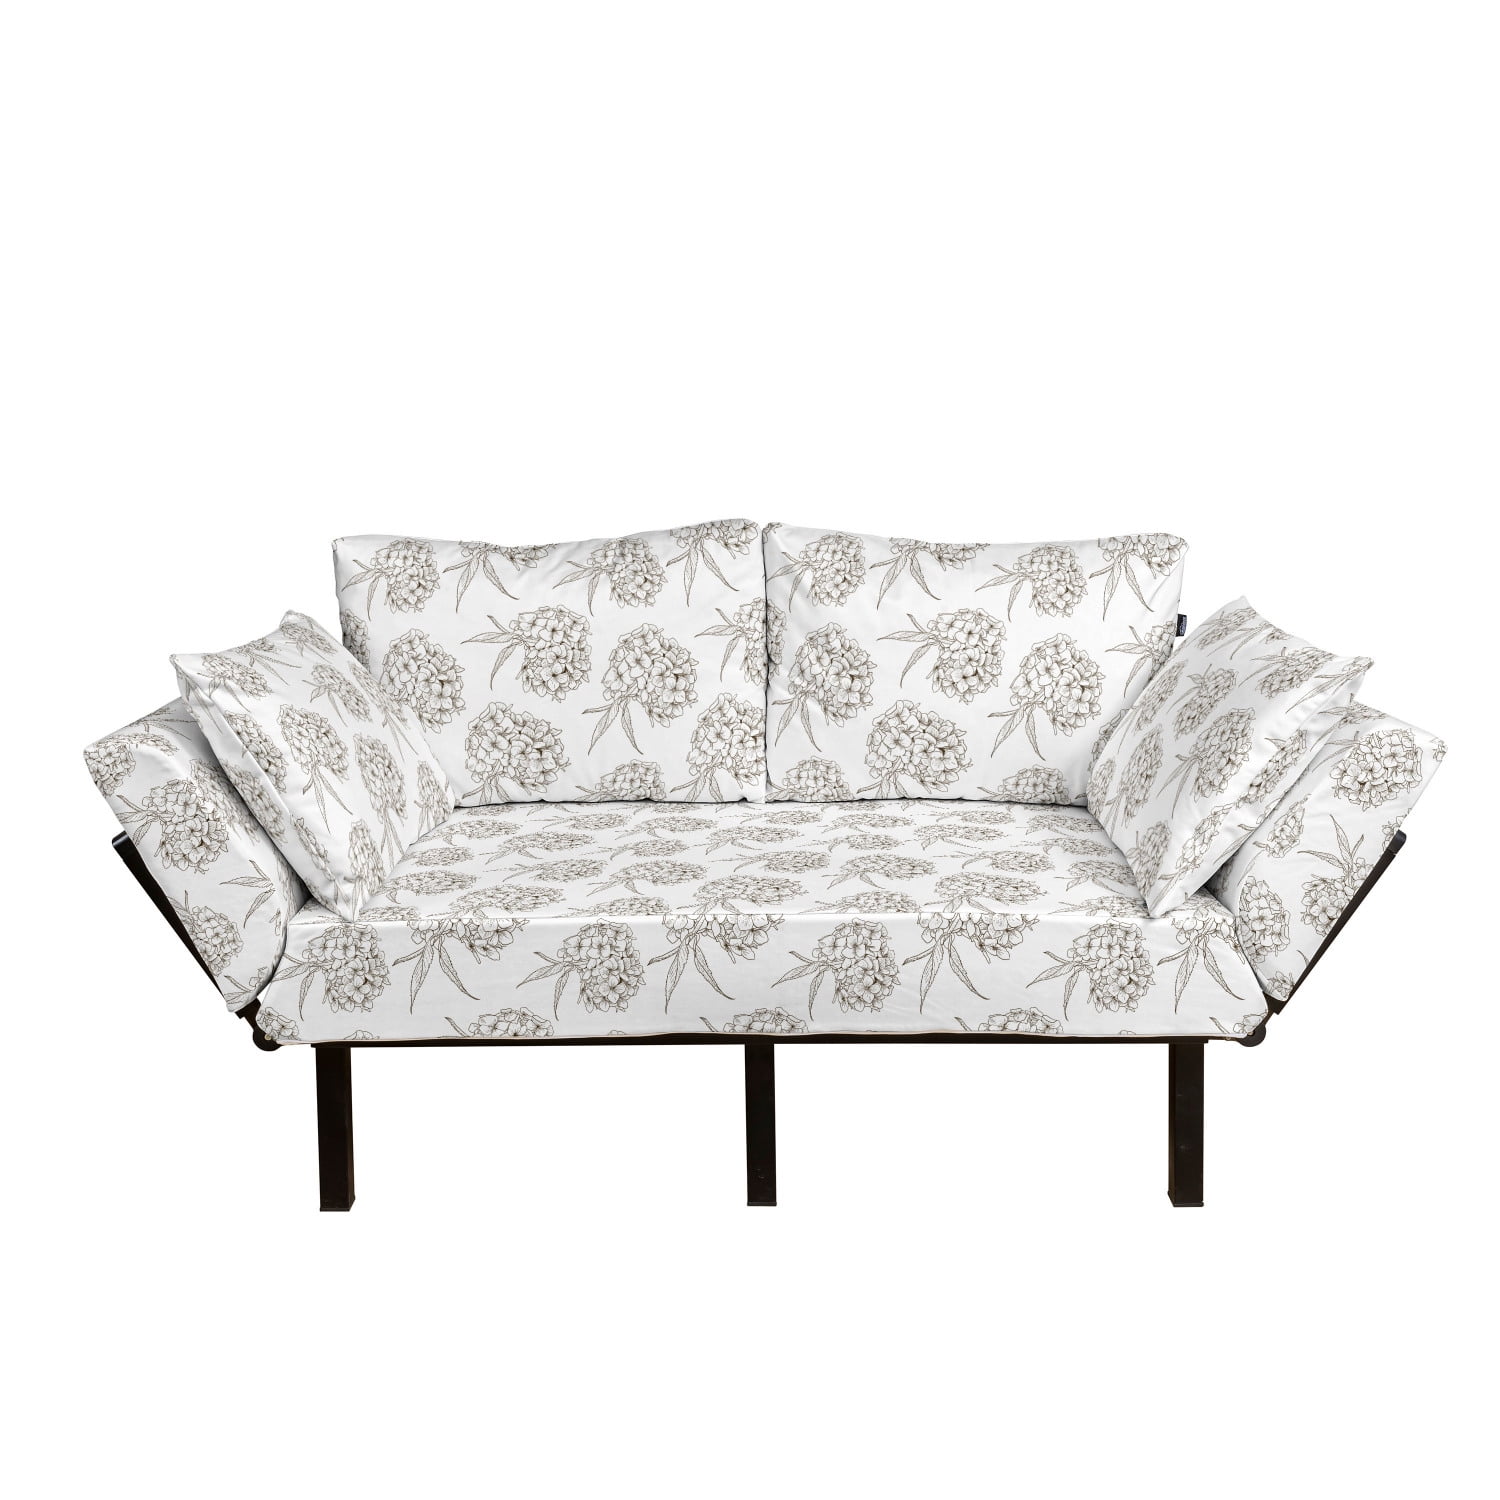 Loveseat Ambesonne Floral Futon Couch Blooming Flower Silhouettes Illustrated on a Plain Background Dark Warm Taupe Rose Daybed with Metal Frame Upholstered Sofa for Living Dorm